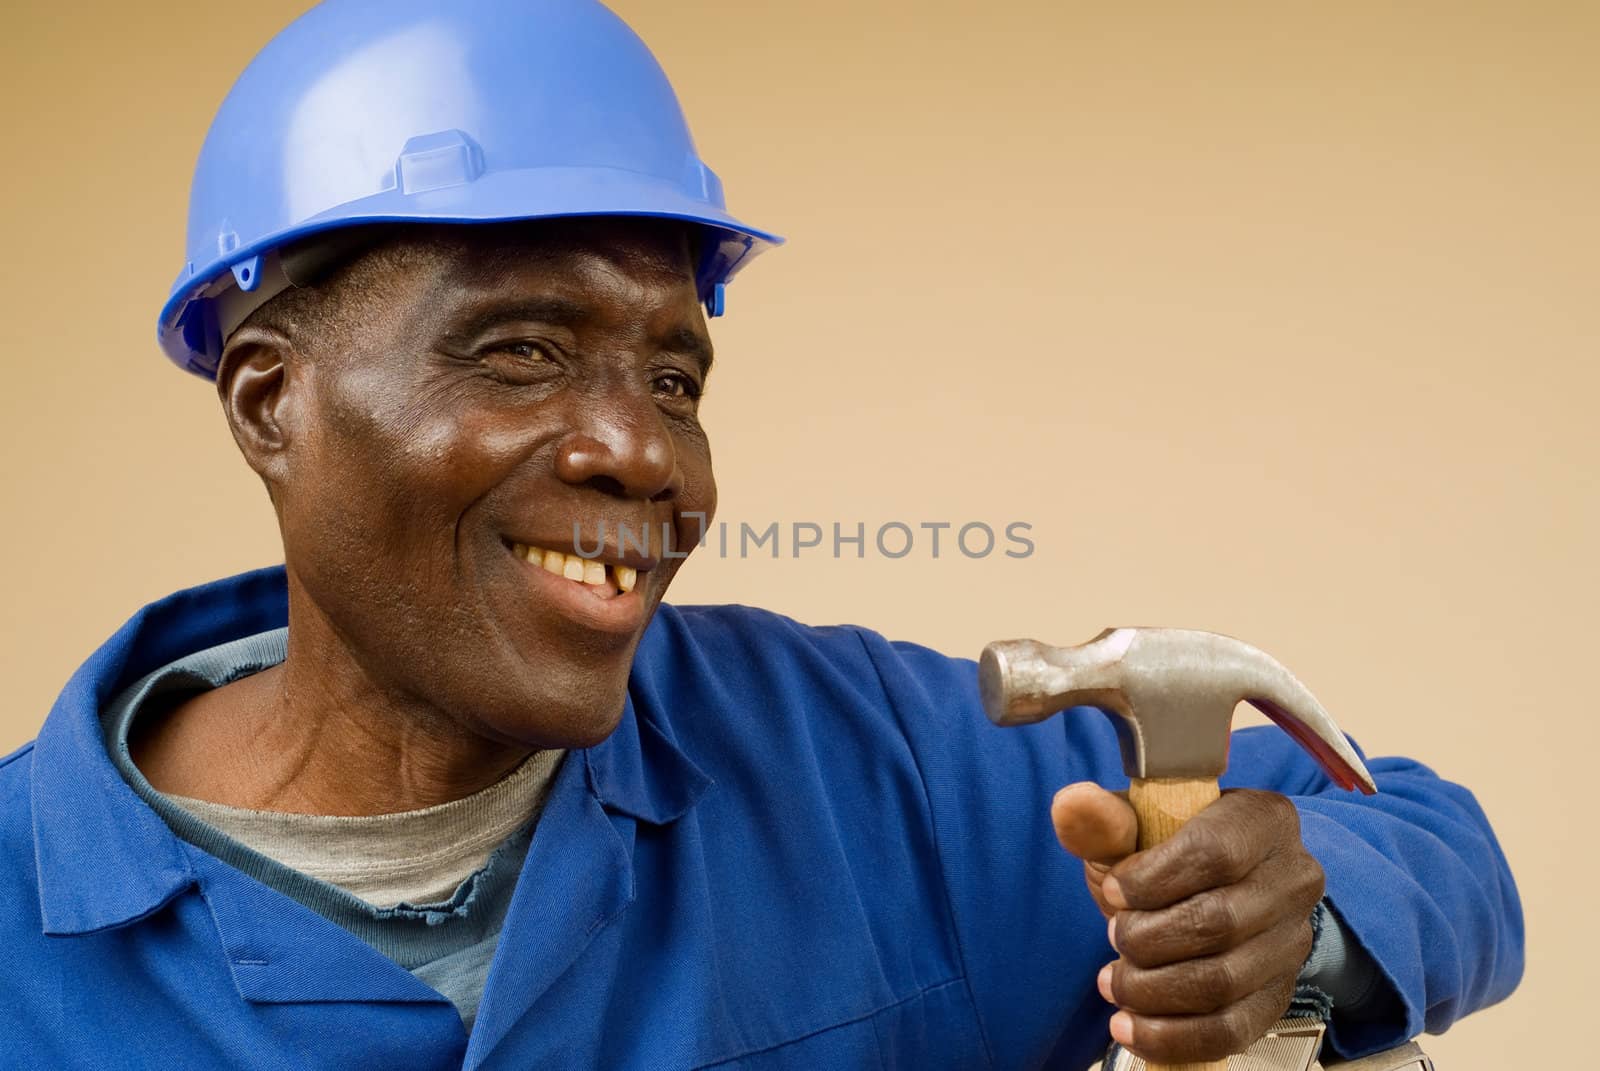 Smiling African American Construction Worker Holding Hammer